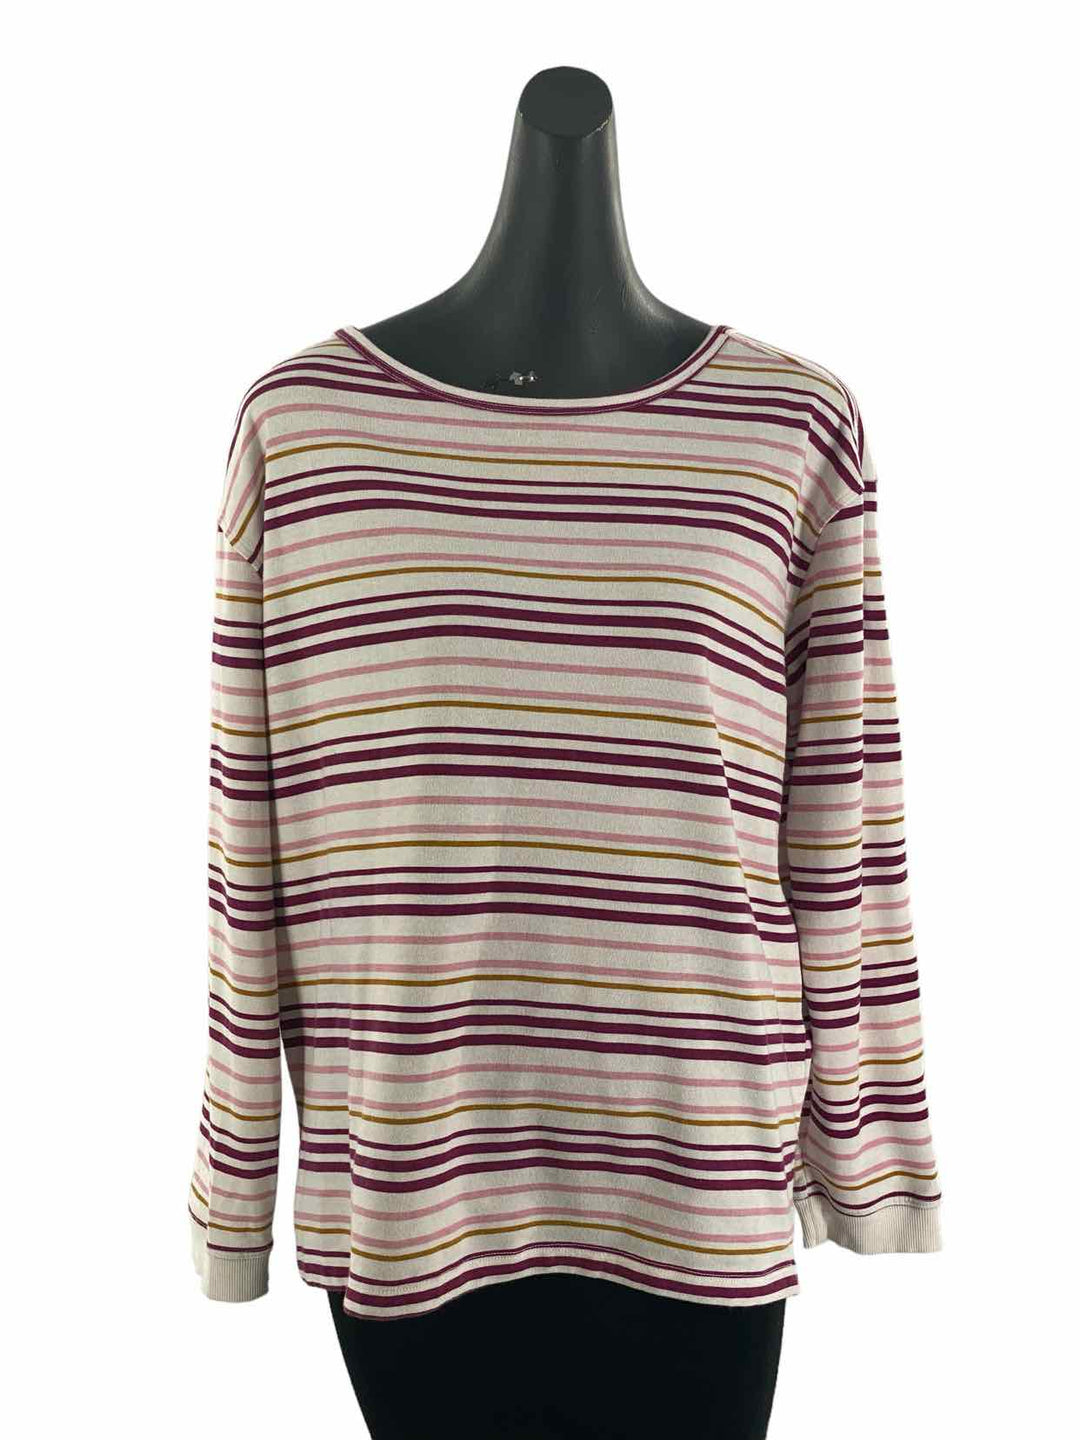 Maurices Size 2X White Purple & Pink Stripes Long Sleeve Shirts